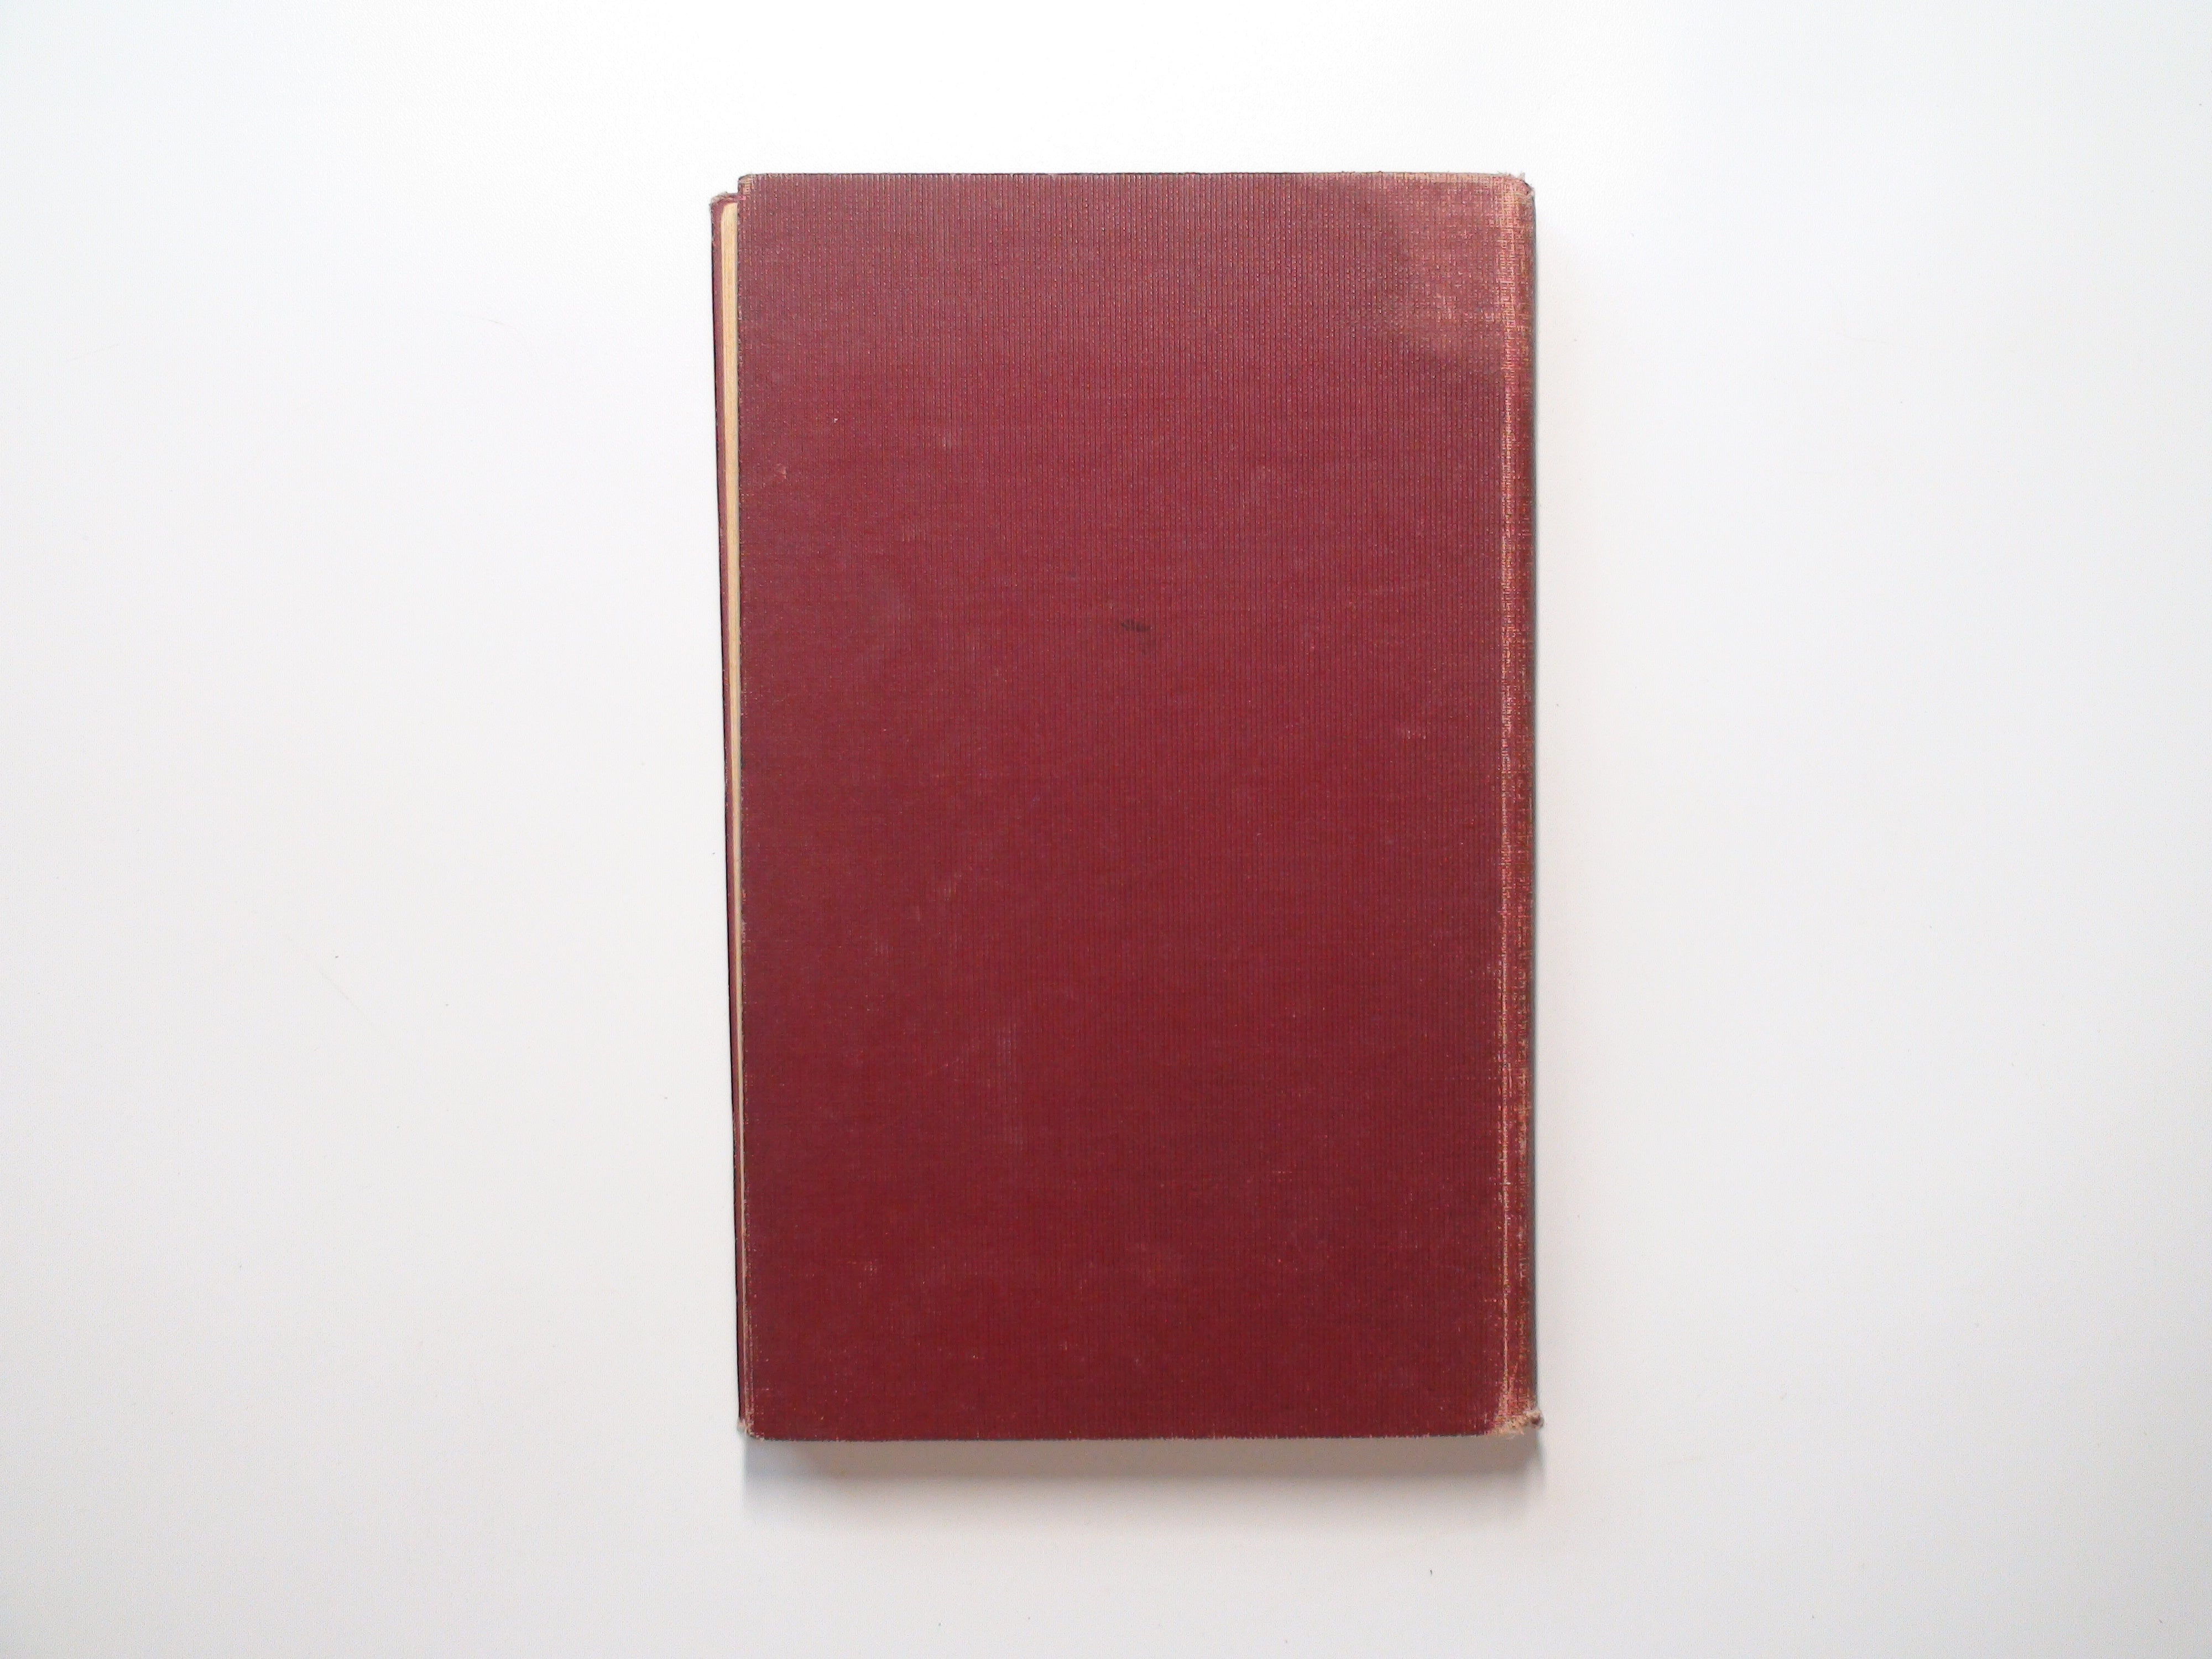 Present-Day Prayer-Meeting Helps, Ed. by Norman E. Richardson, 1st Ed, 1910